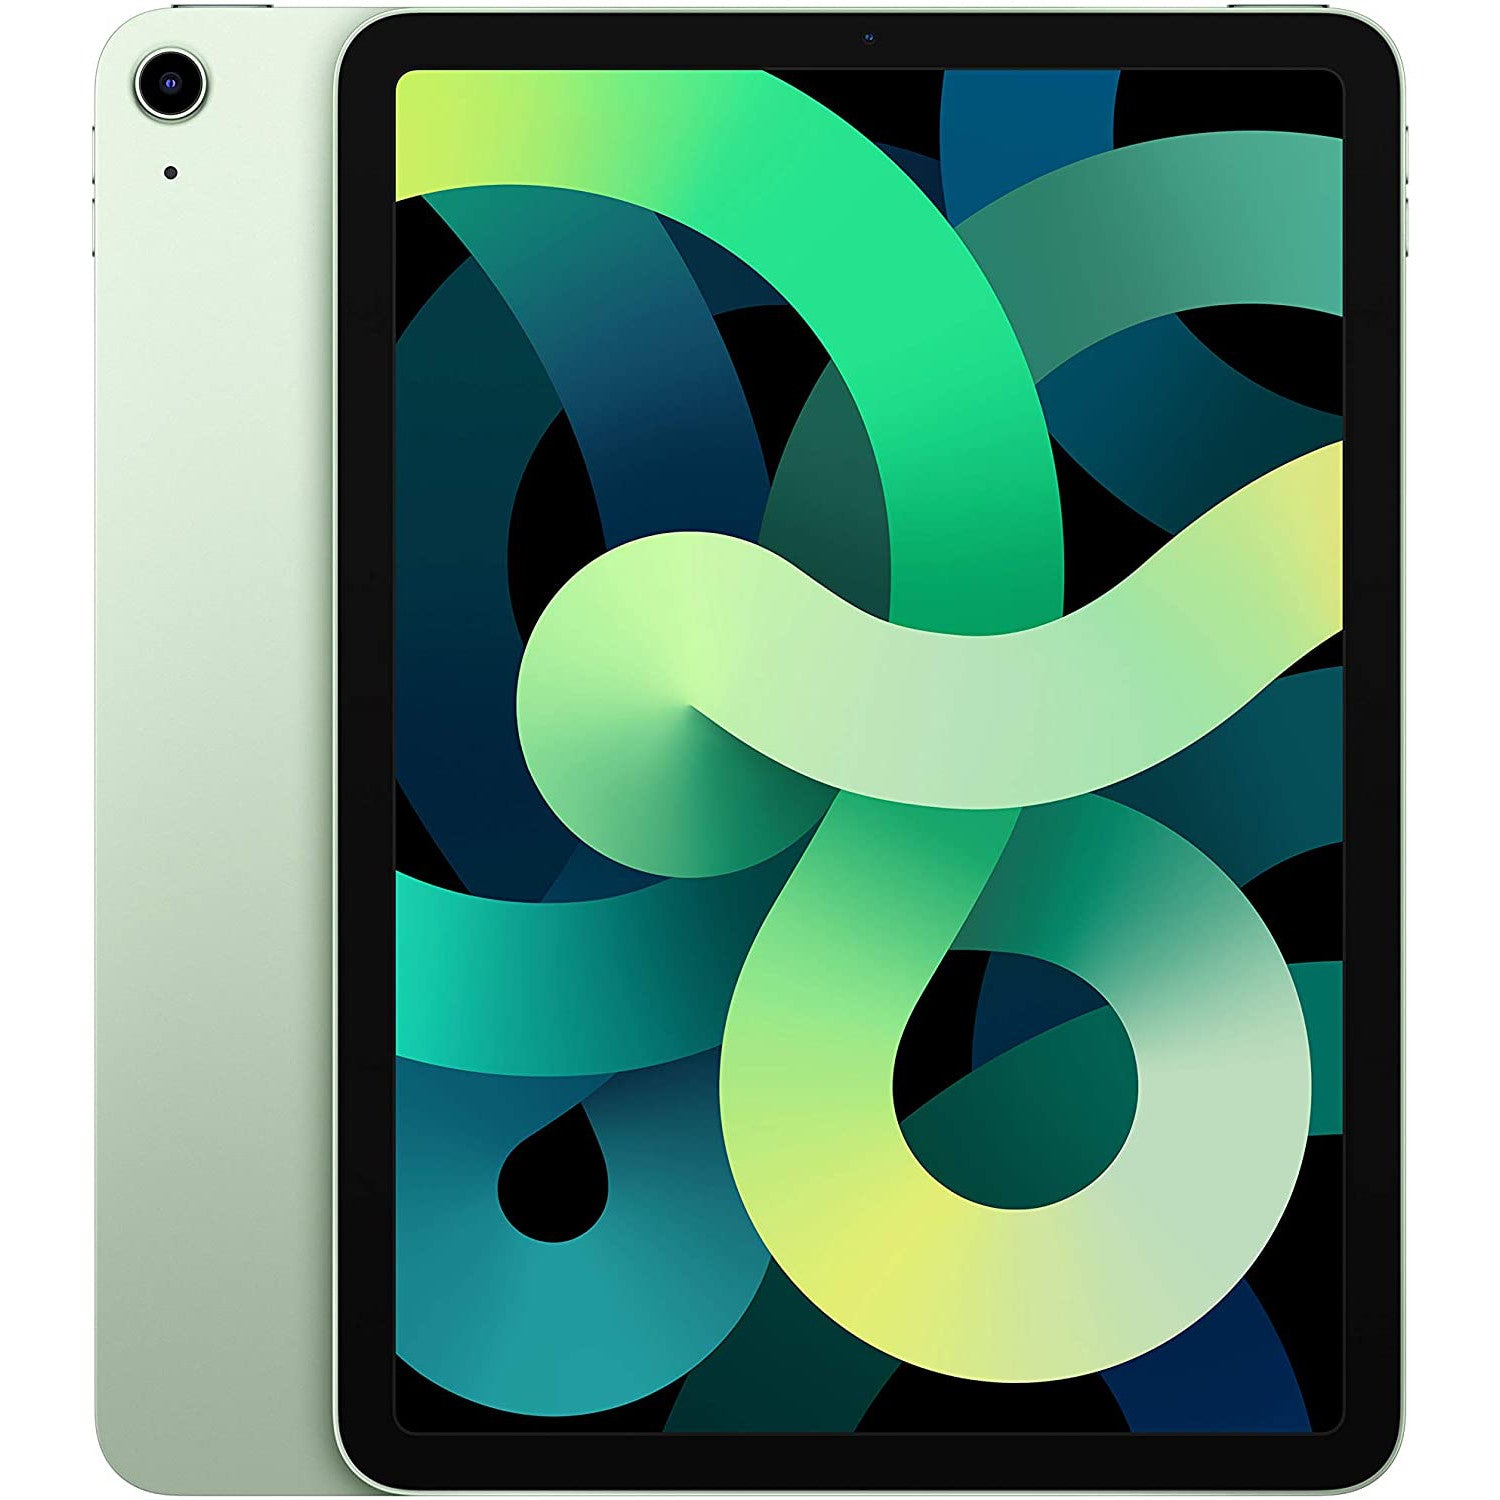 iPad Air 4 64GB WiFi - Verde - Impecable